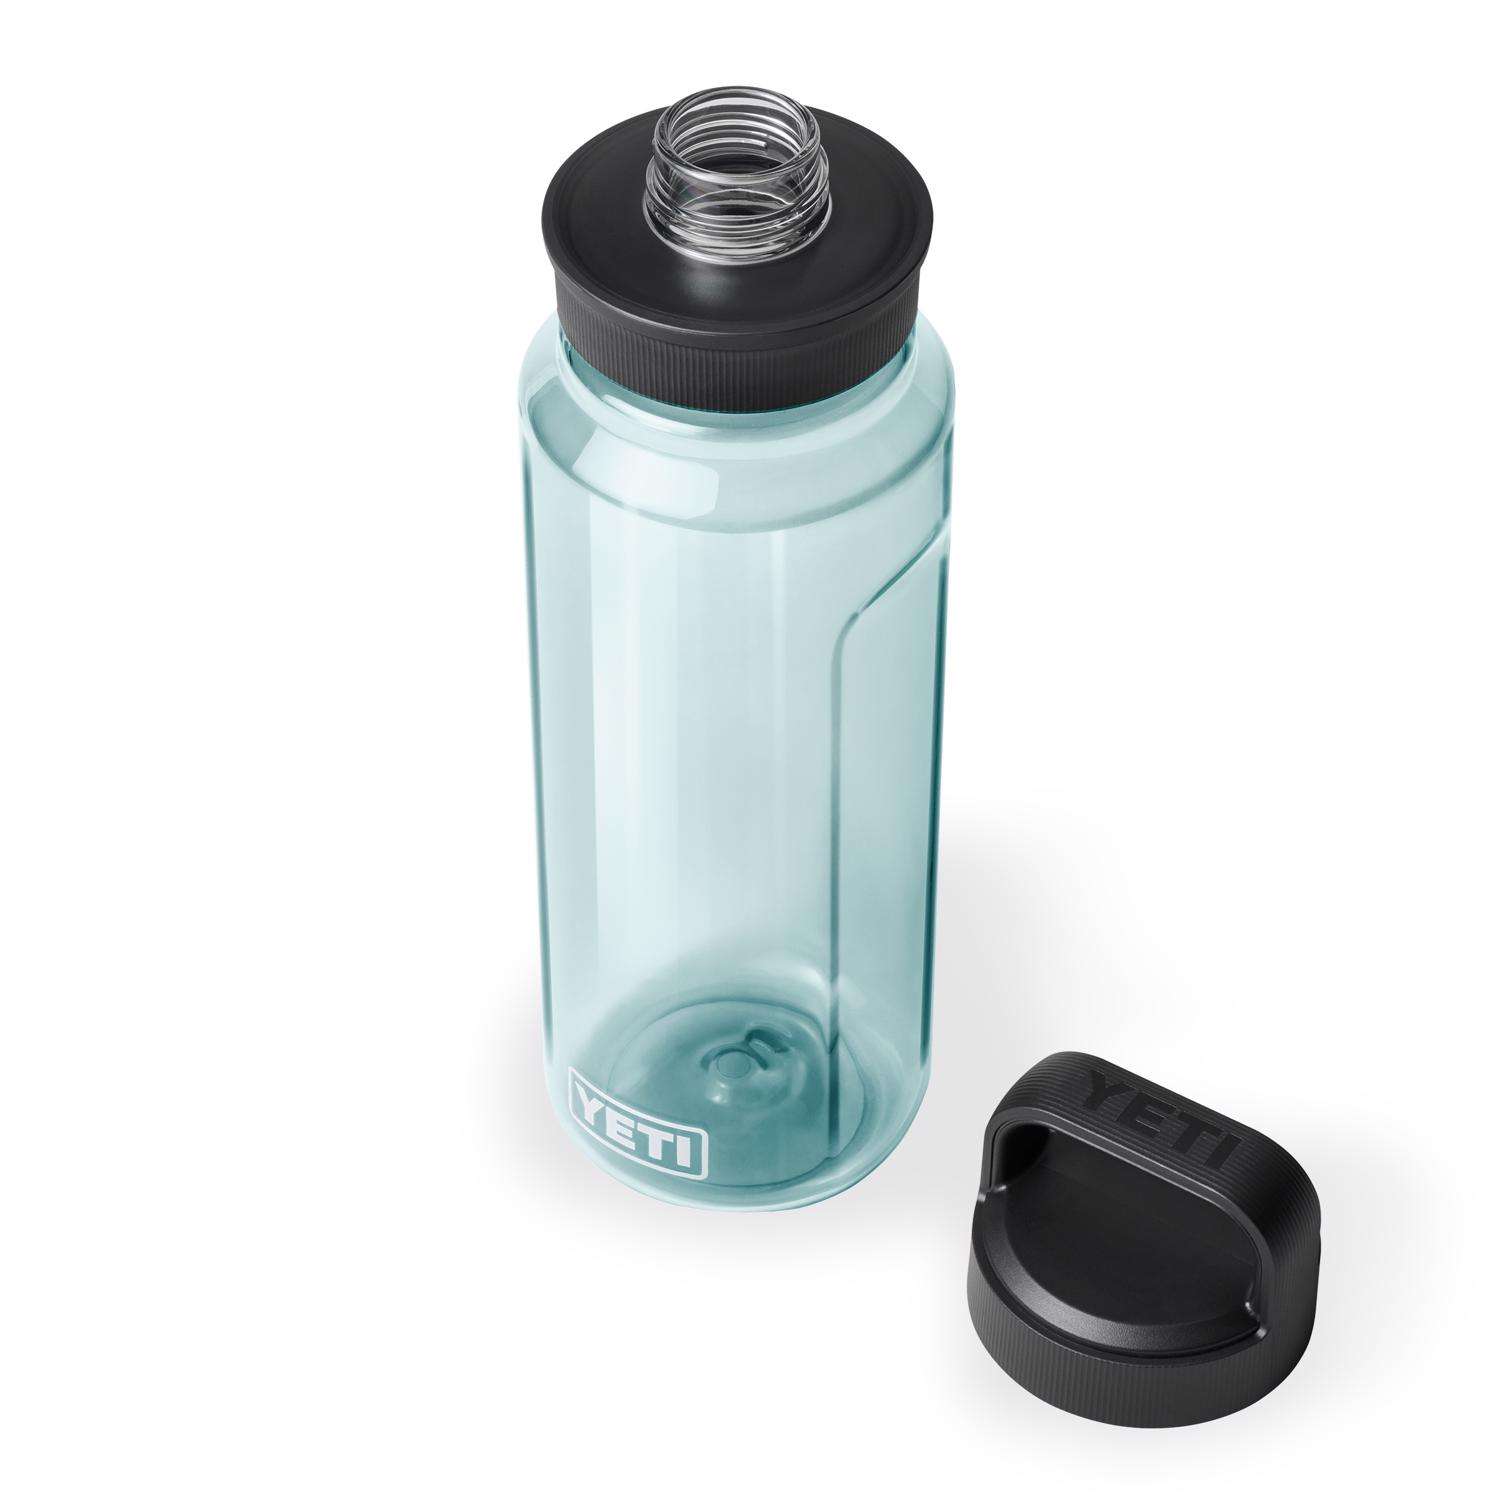 Studio Oh - Care Way Less Glass Water Bottle with Straw